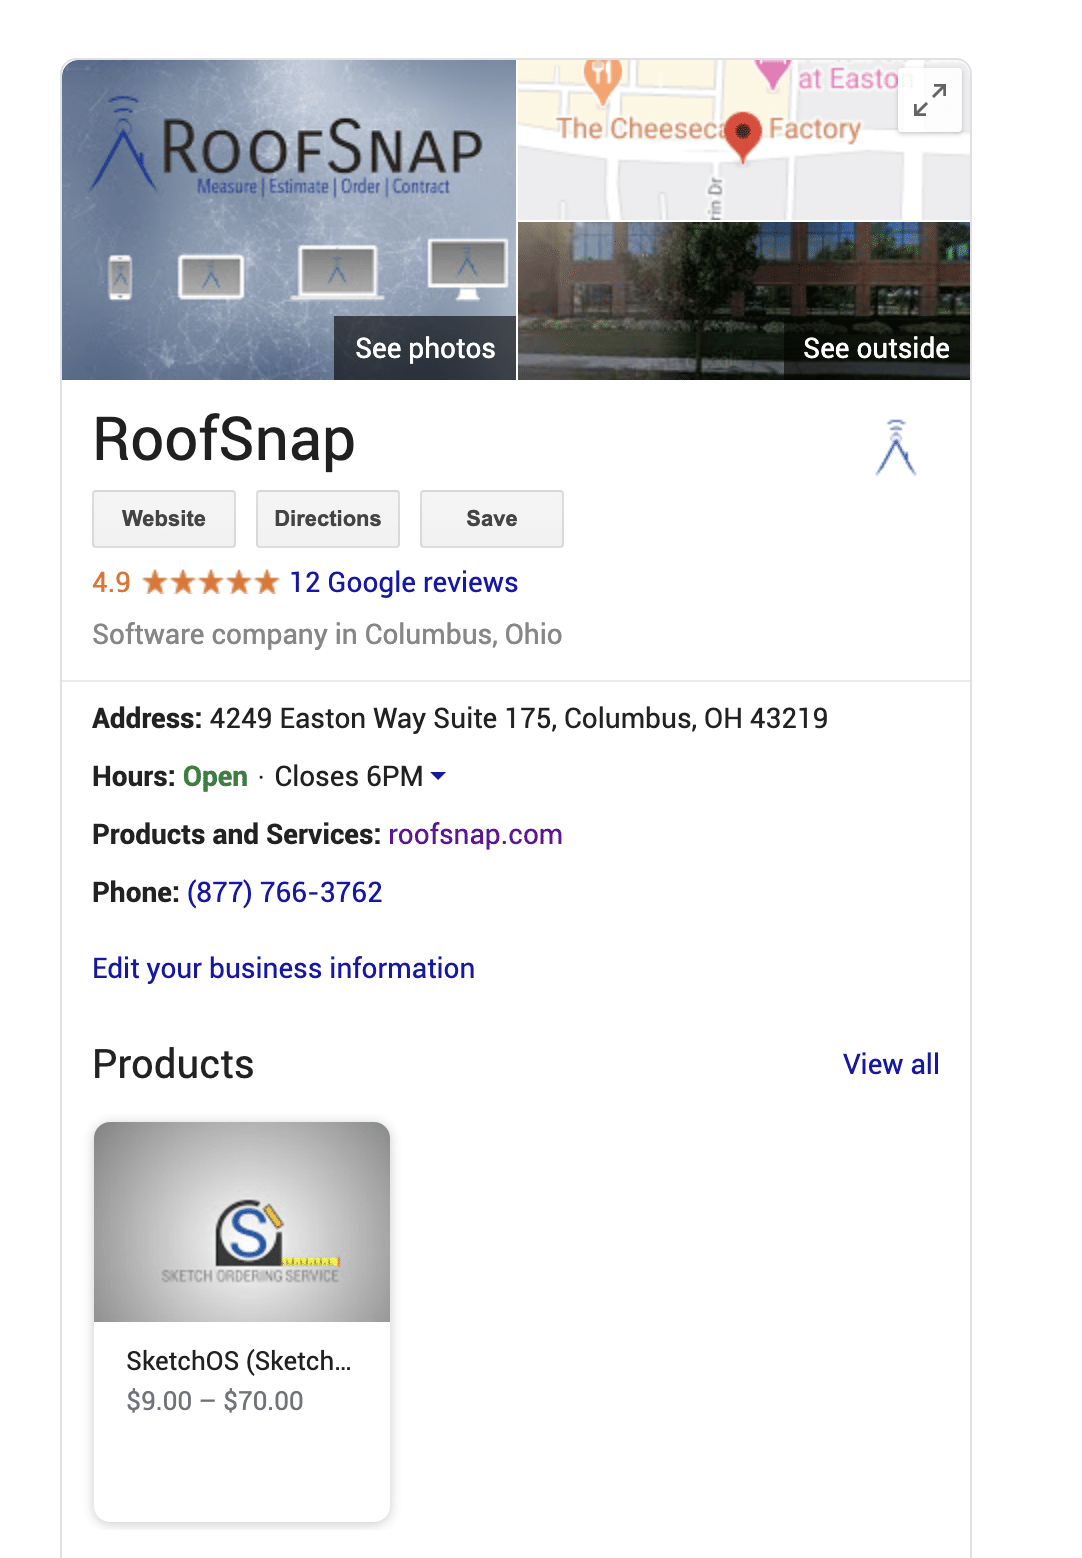 RoofSnap's Google My Business Page